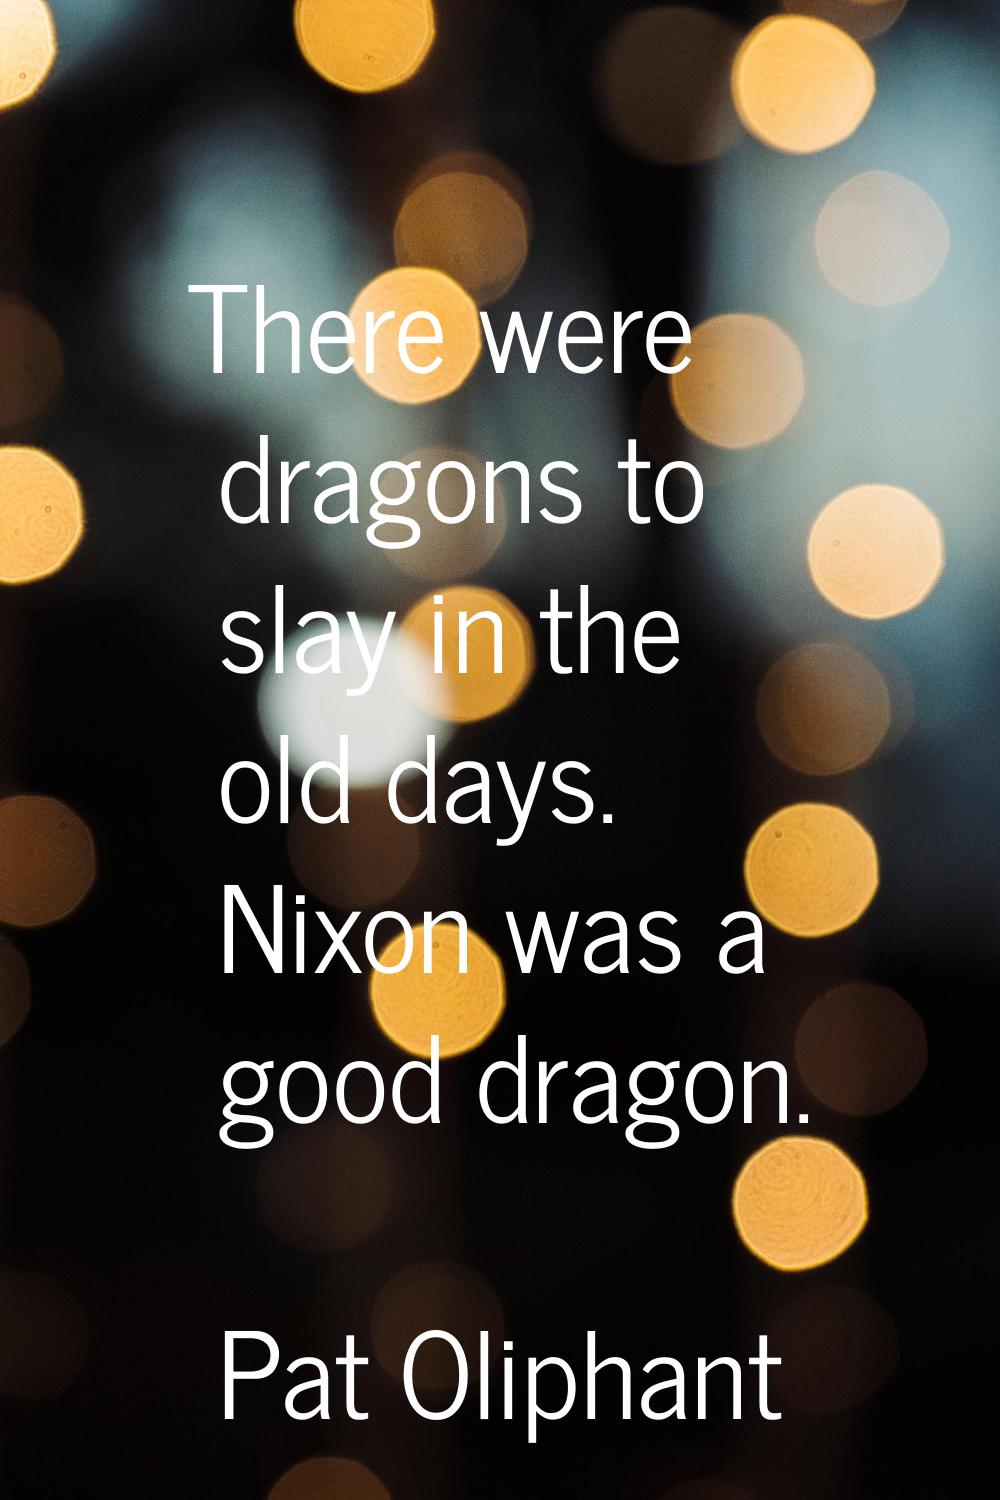 There were dragons to slay in the old days. Nixon was a good dragon.